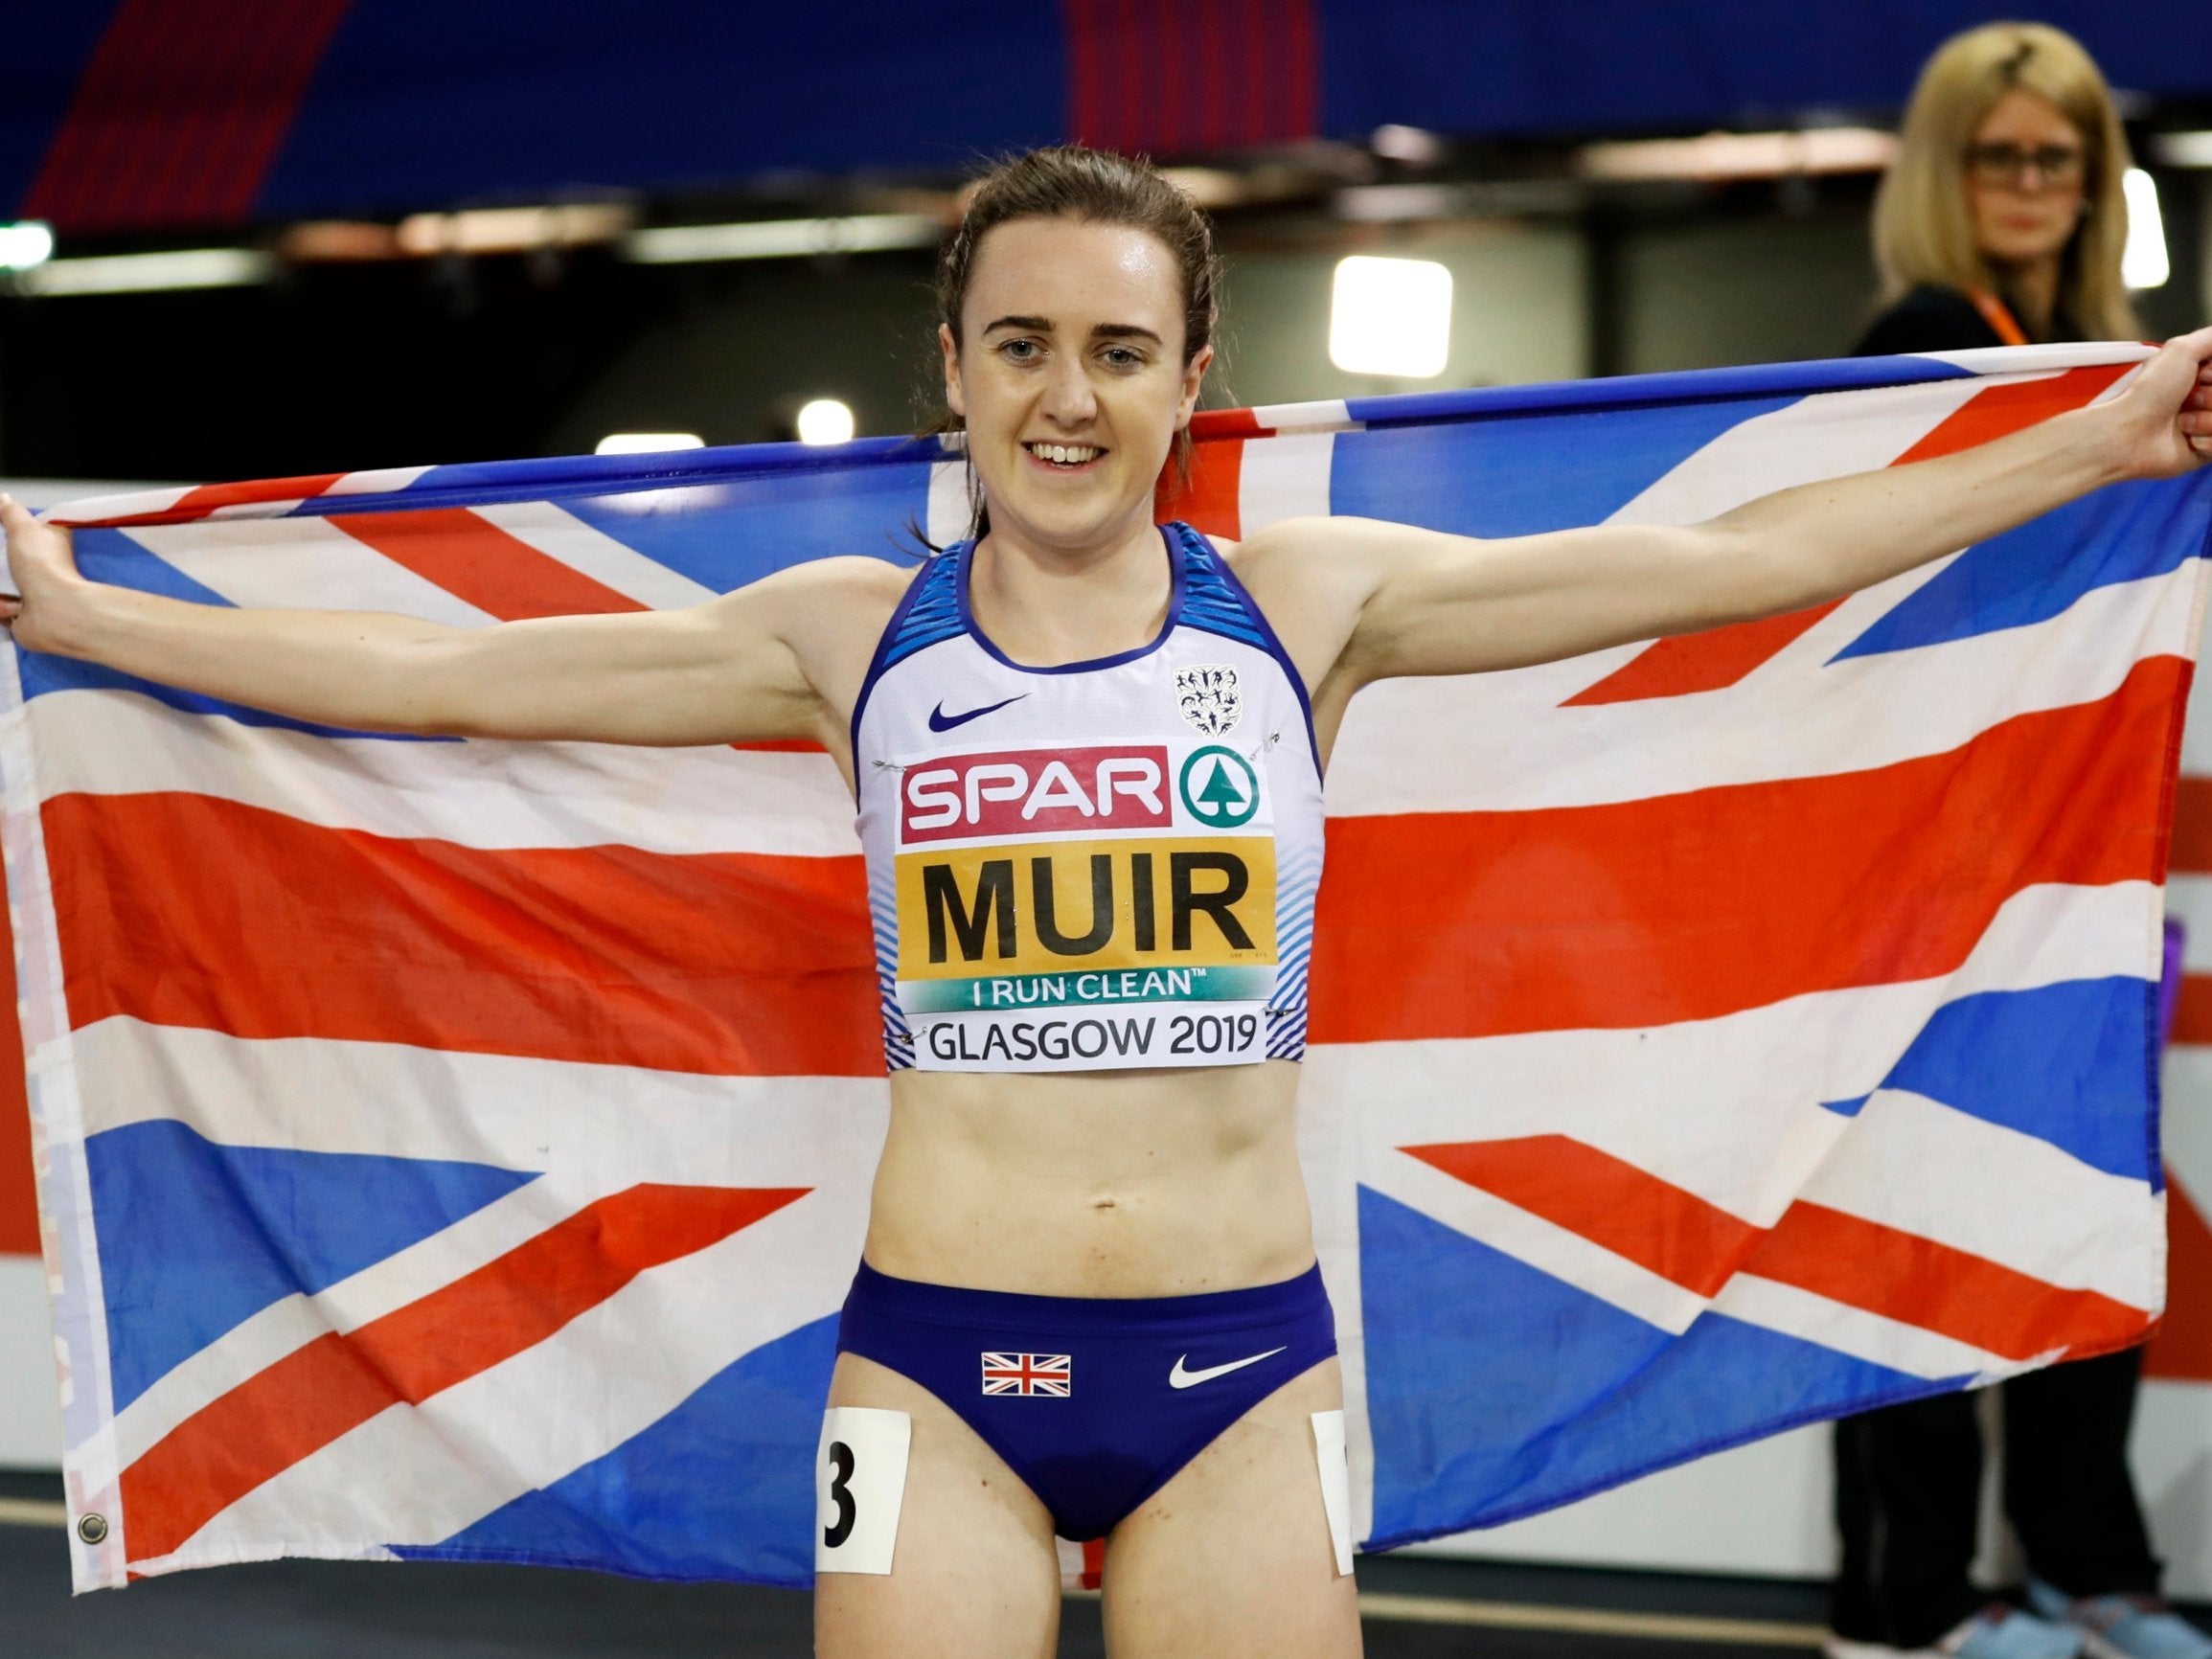 Laura Muir celebrates after winning in the women's 3,000m final at the European Indoor Championships